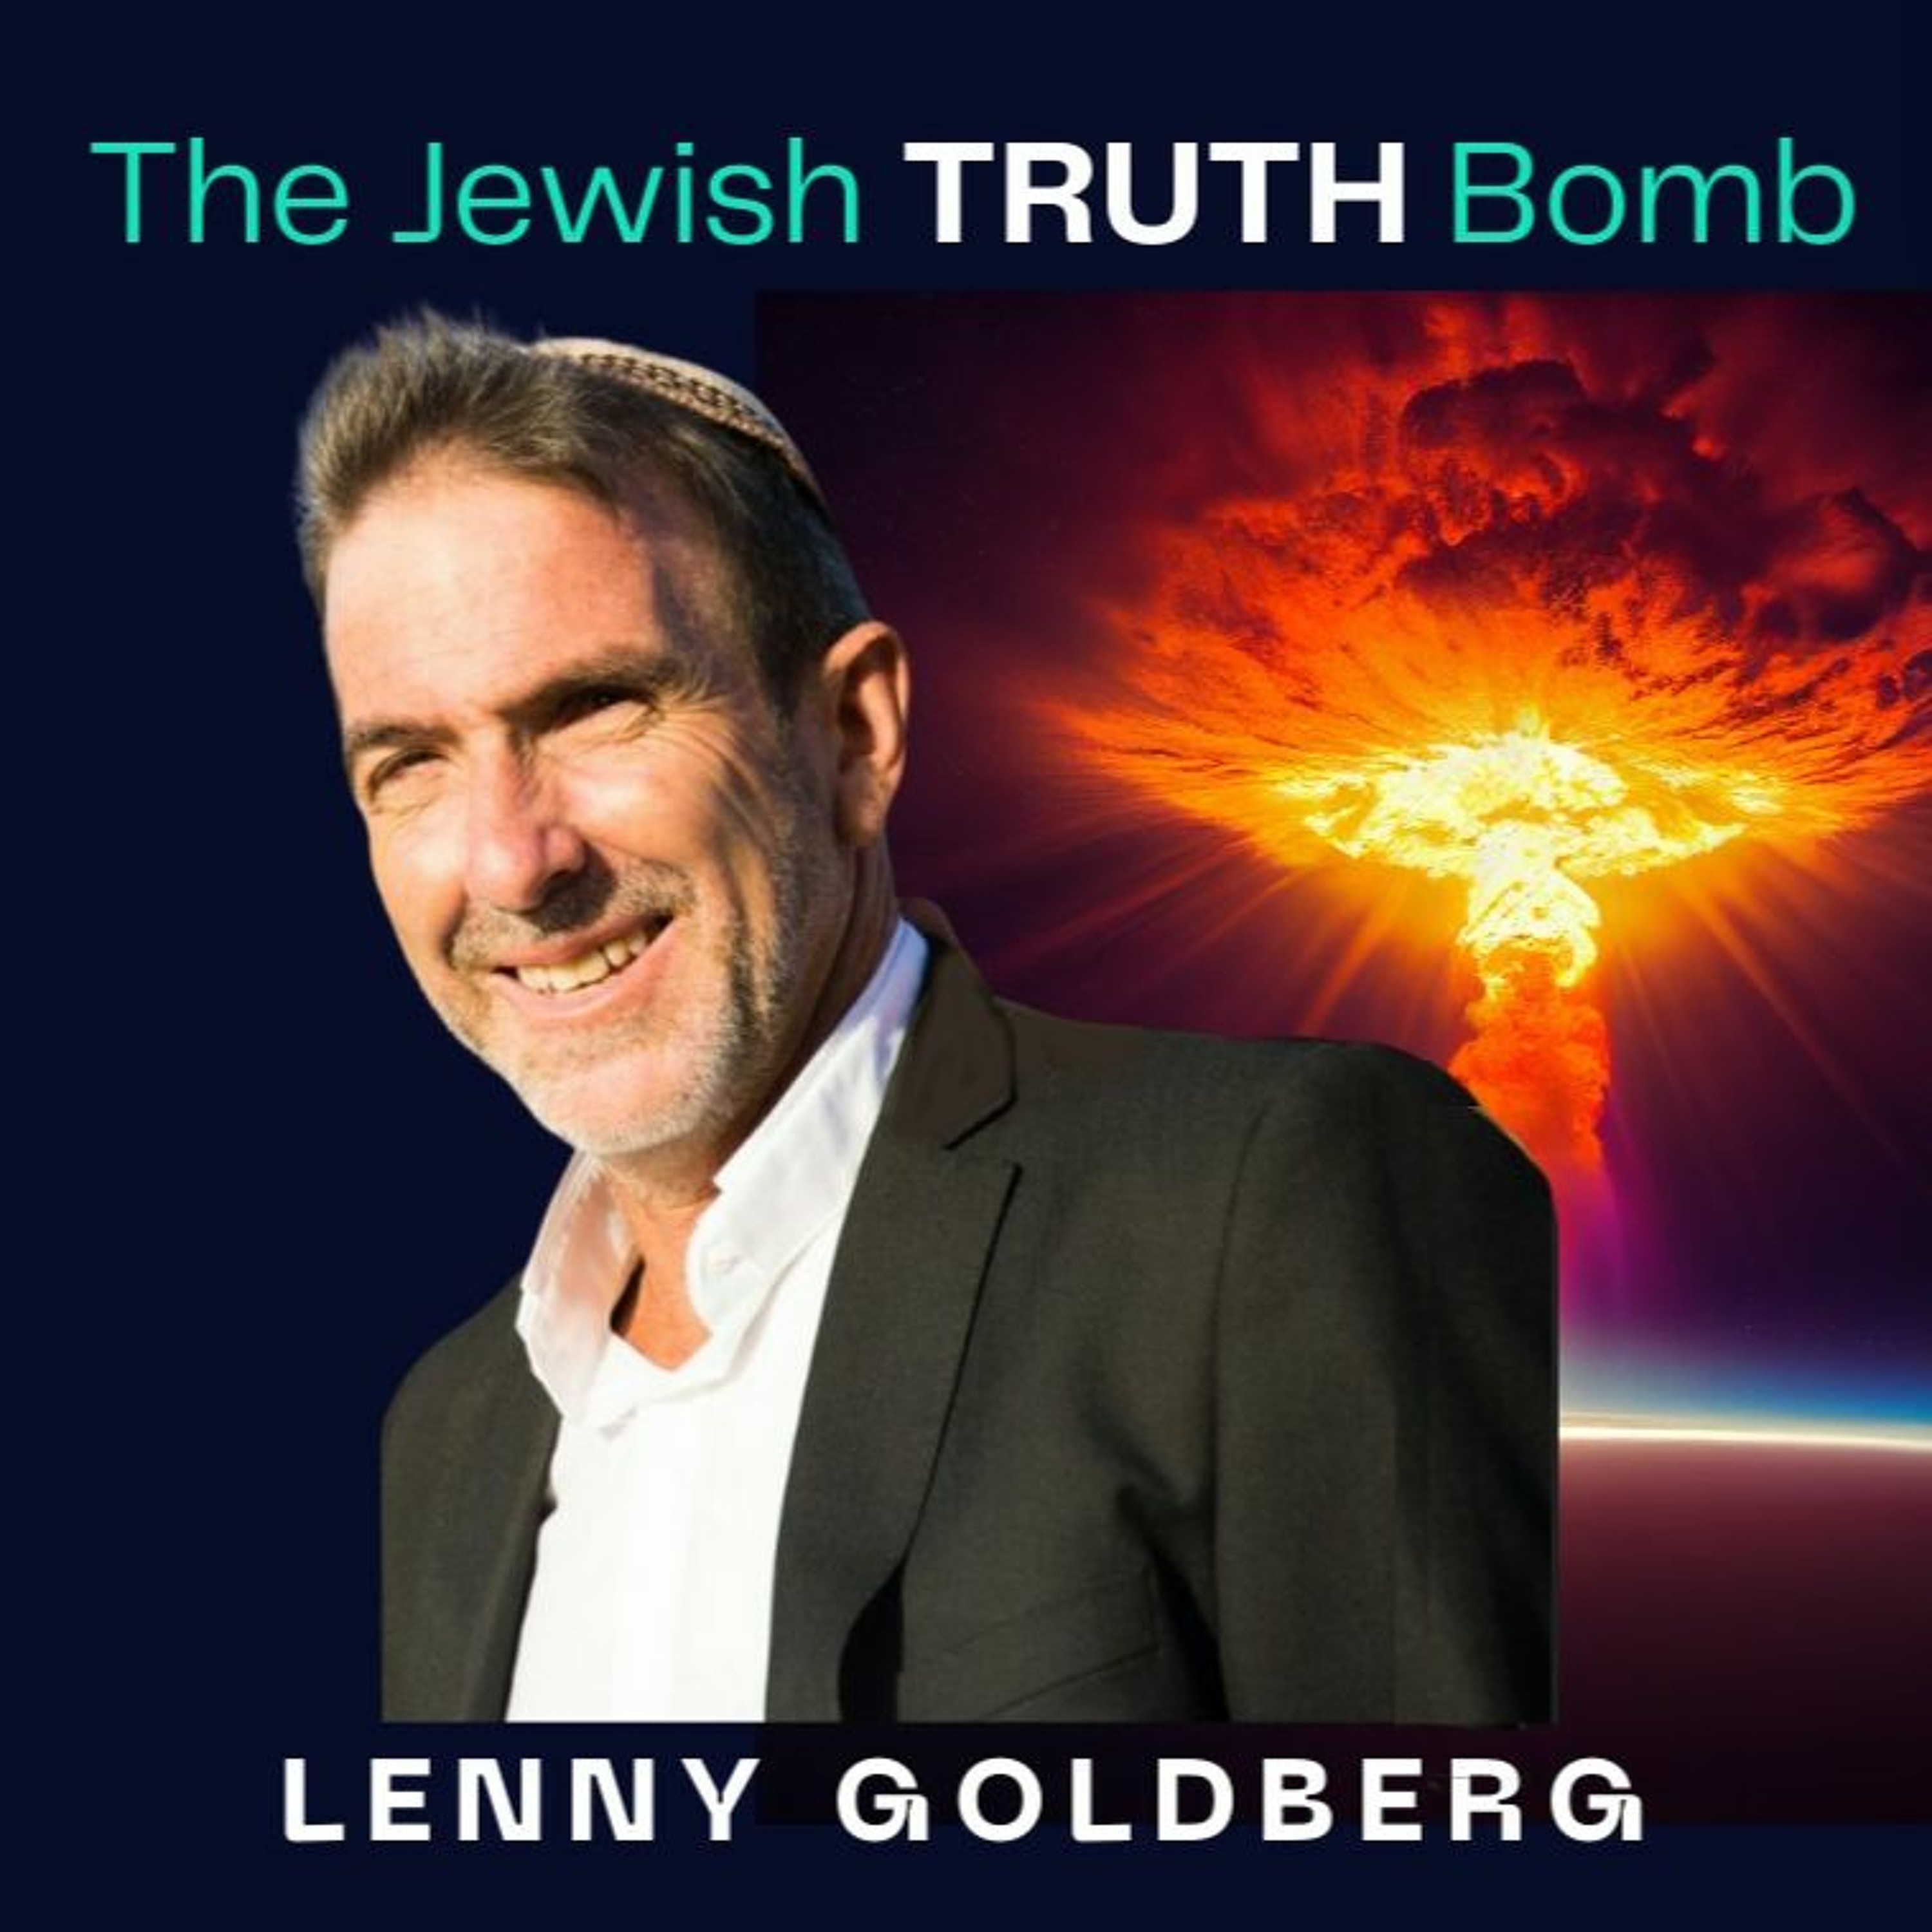 Another Side to GenoCide, Why at This Time? - The Jewish Truth Bomb